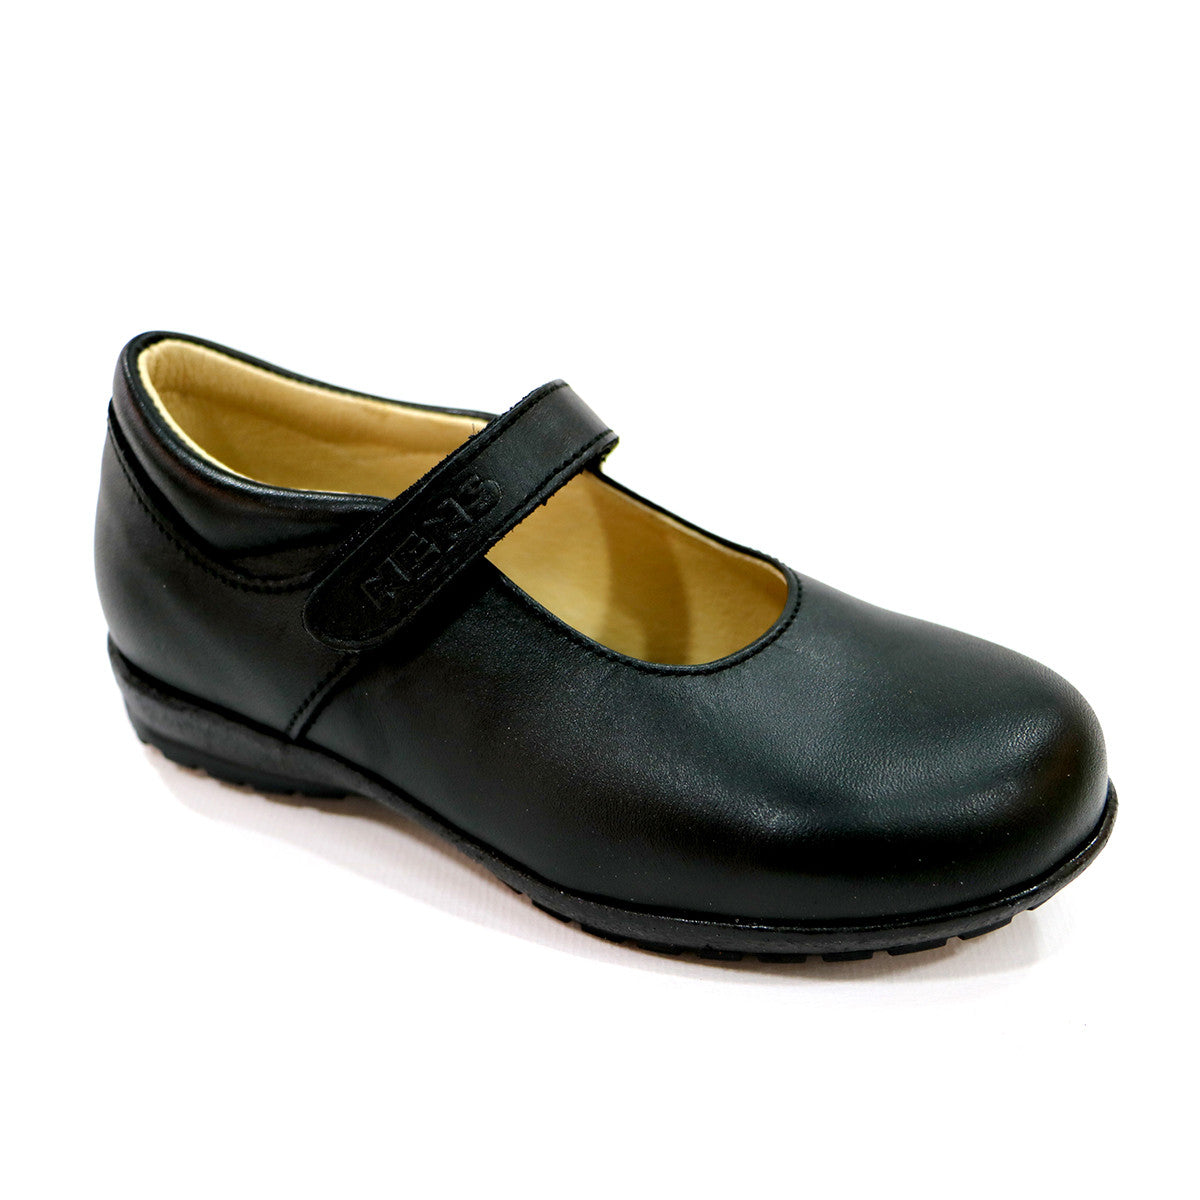 school shoes for girls – Simply Shoes 